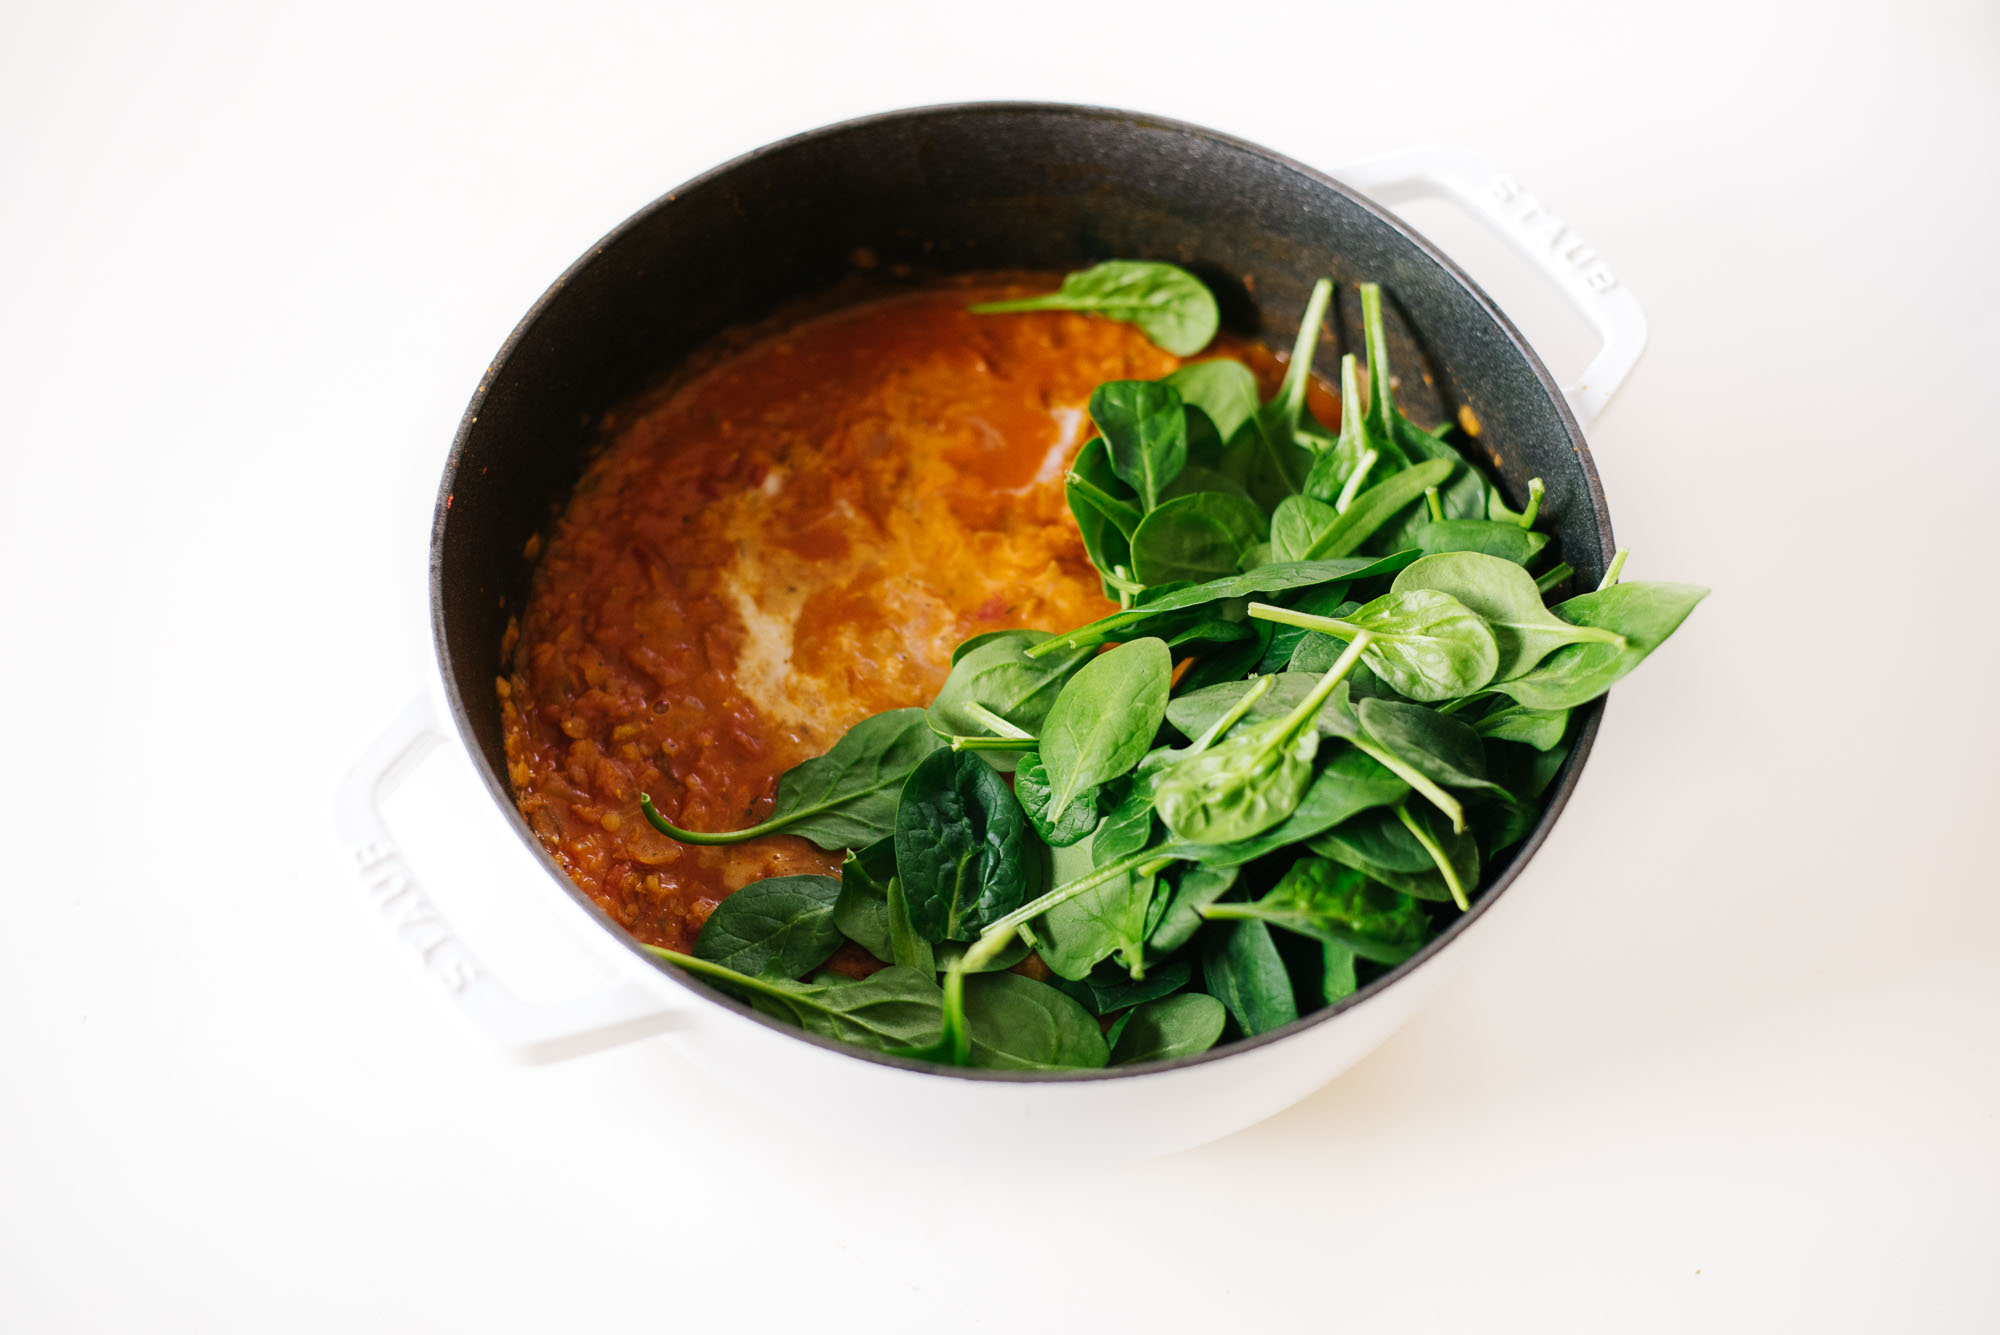 Coconut Curry Lentils from Pretty Simple Cooking